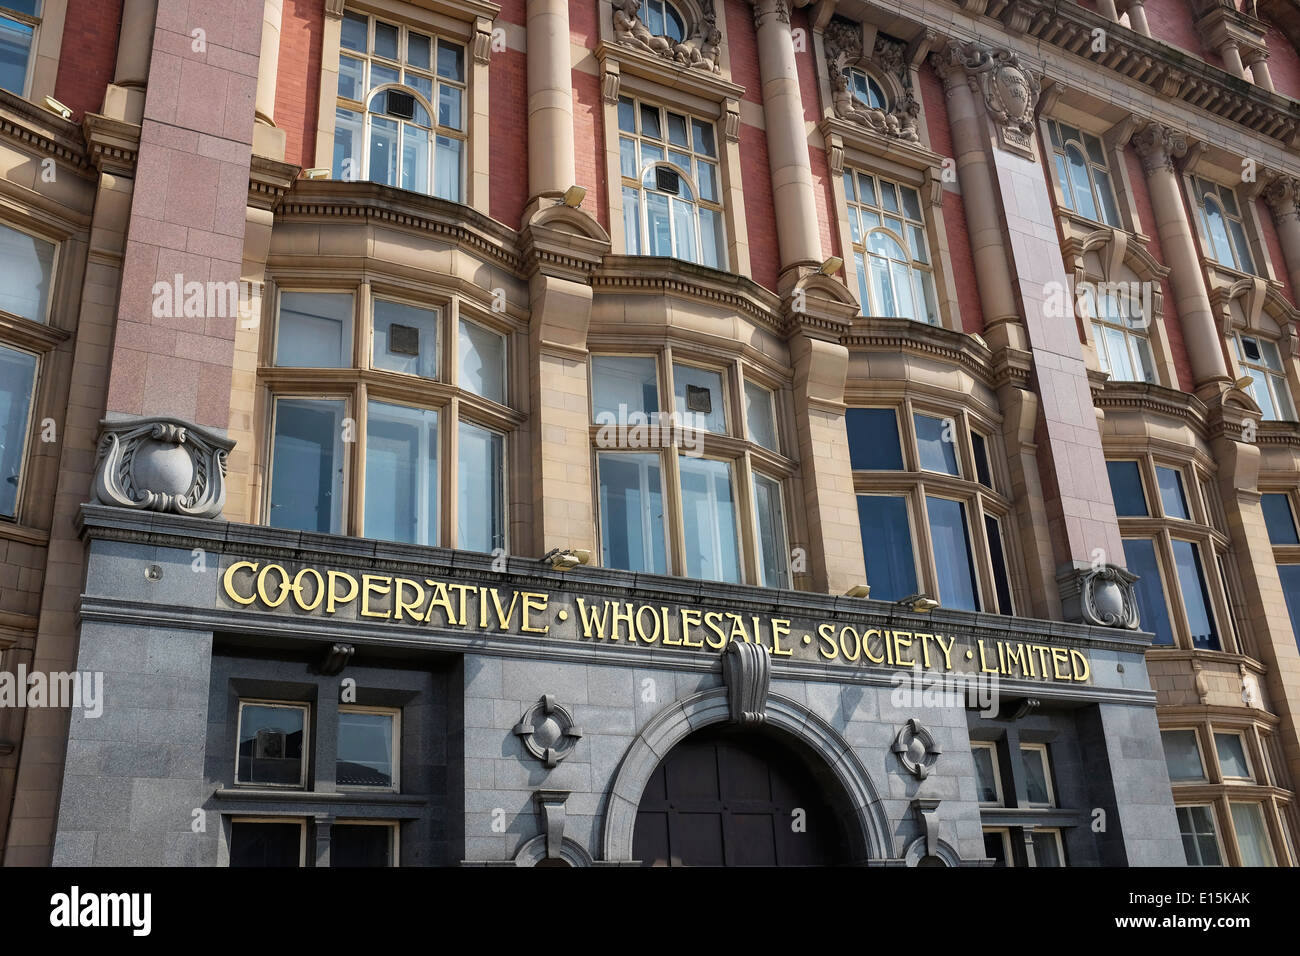 Old frontage to a Cooperative Wholesale Society Limited building in Manchester city centre UK Stock Photo